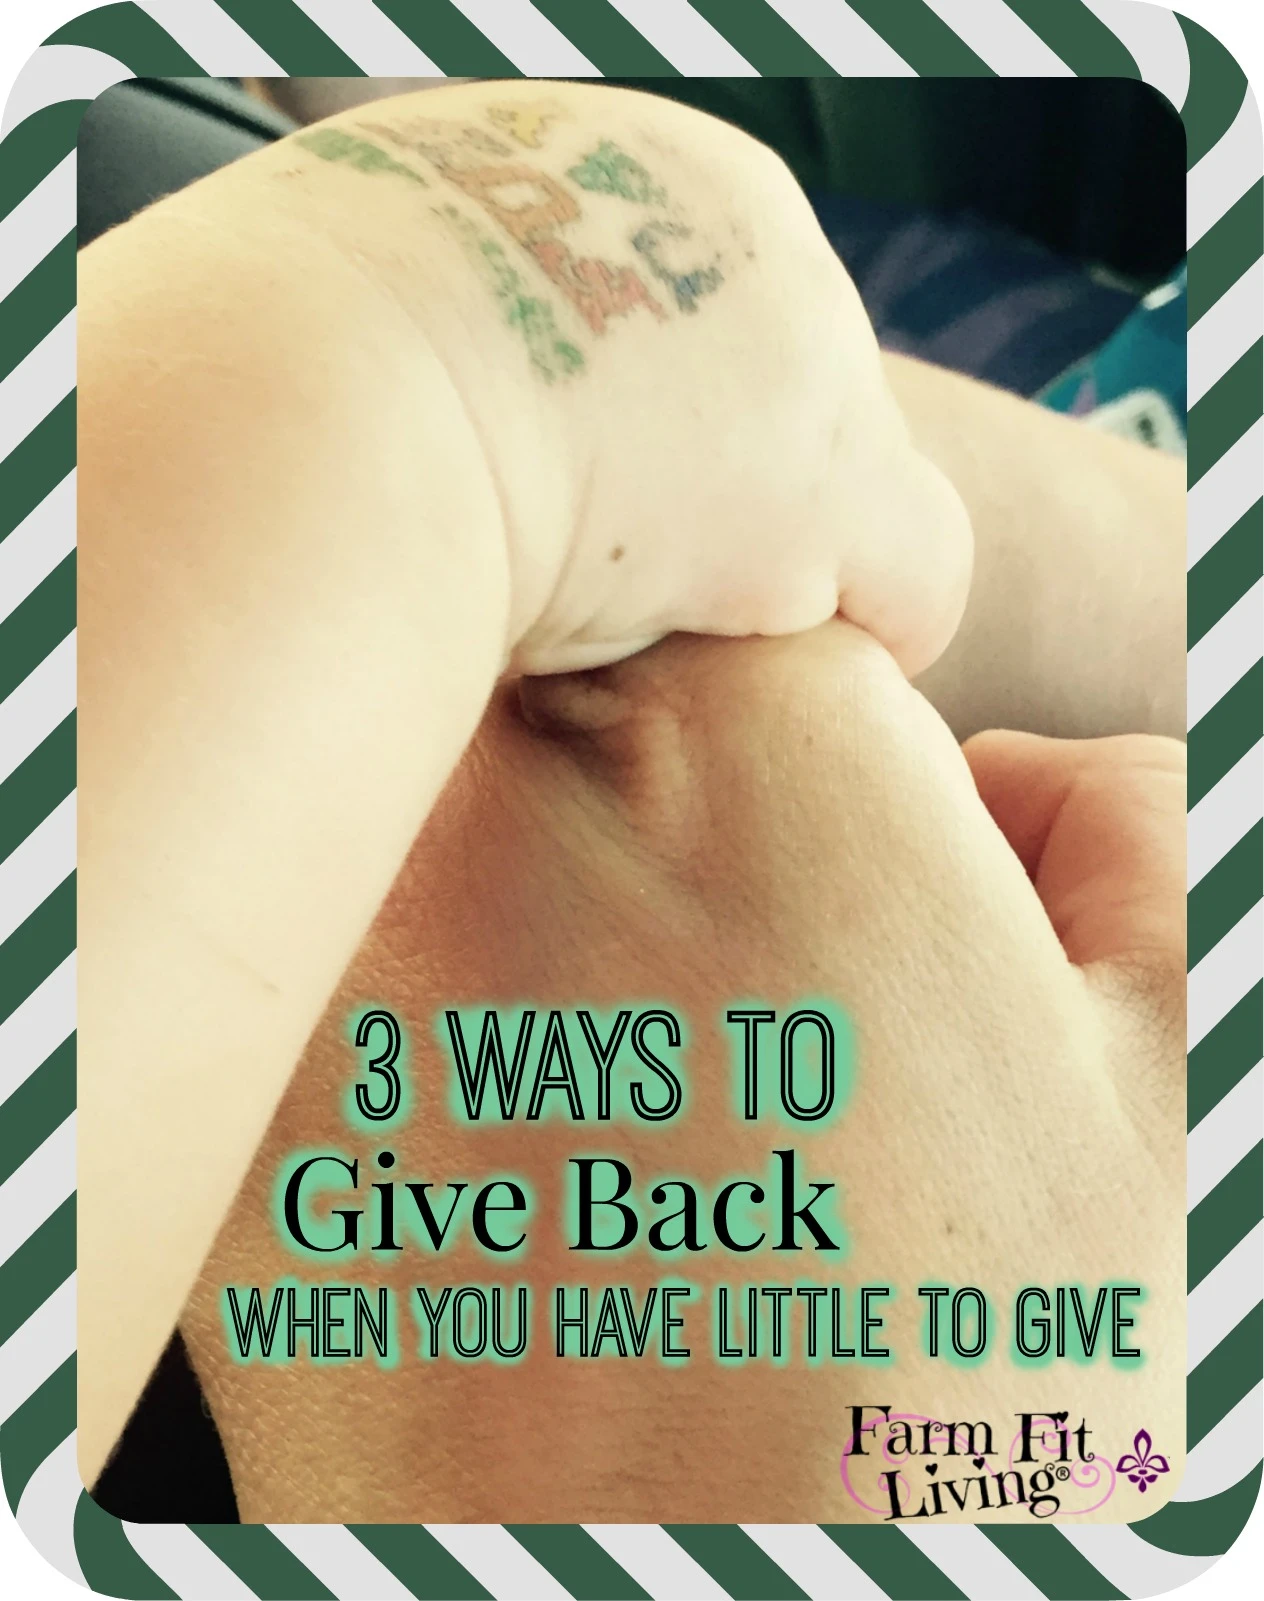 How to give back when you have so little to give